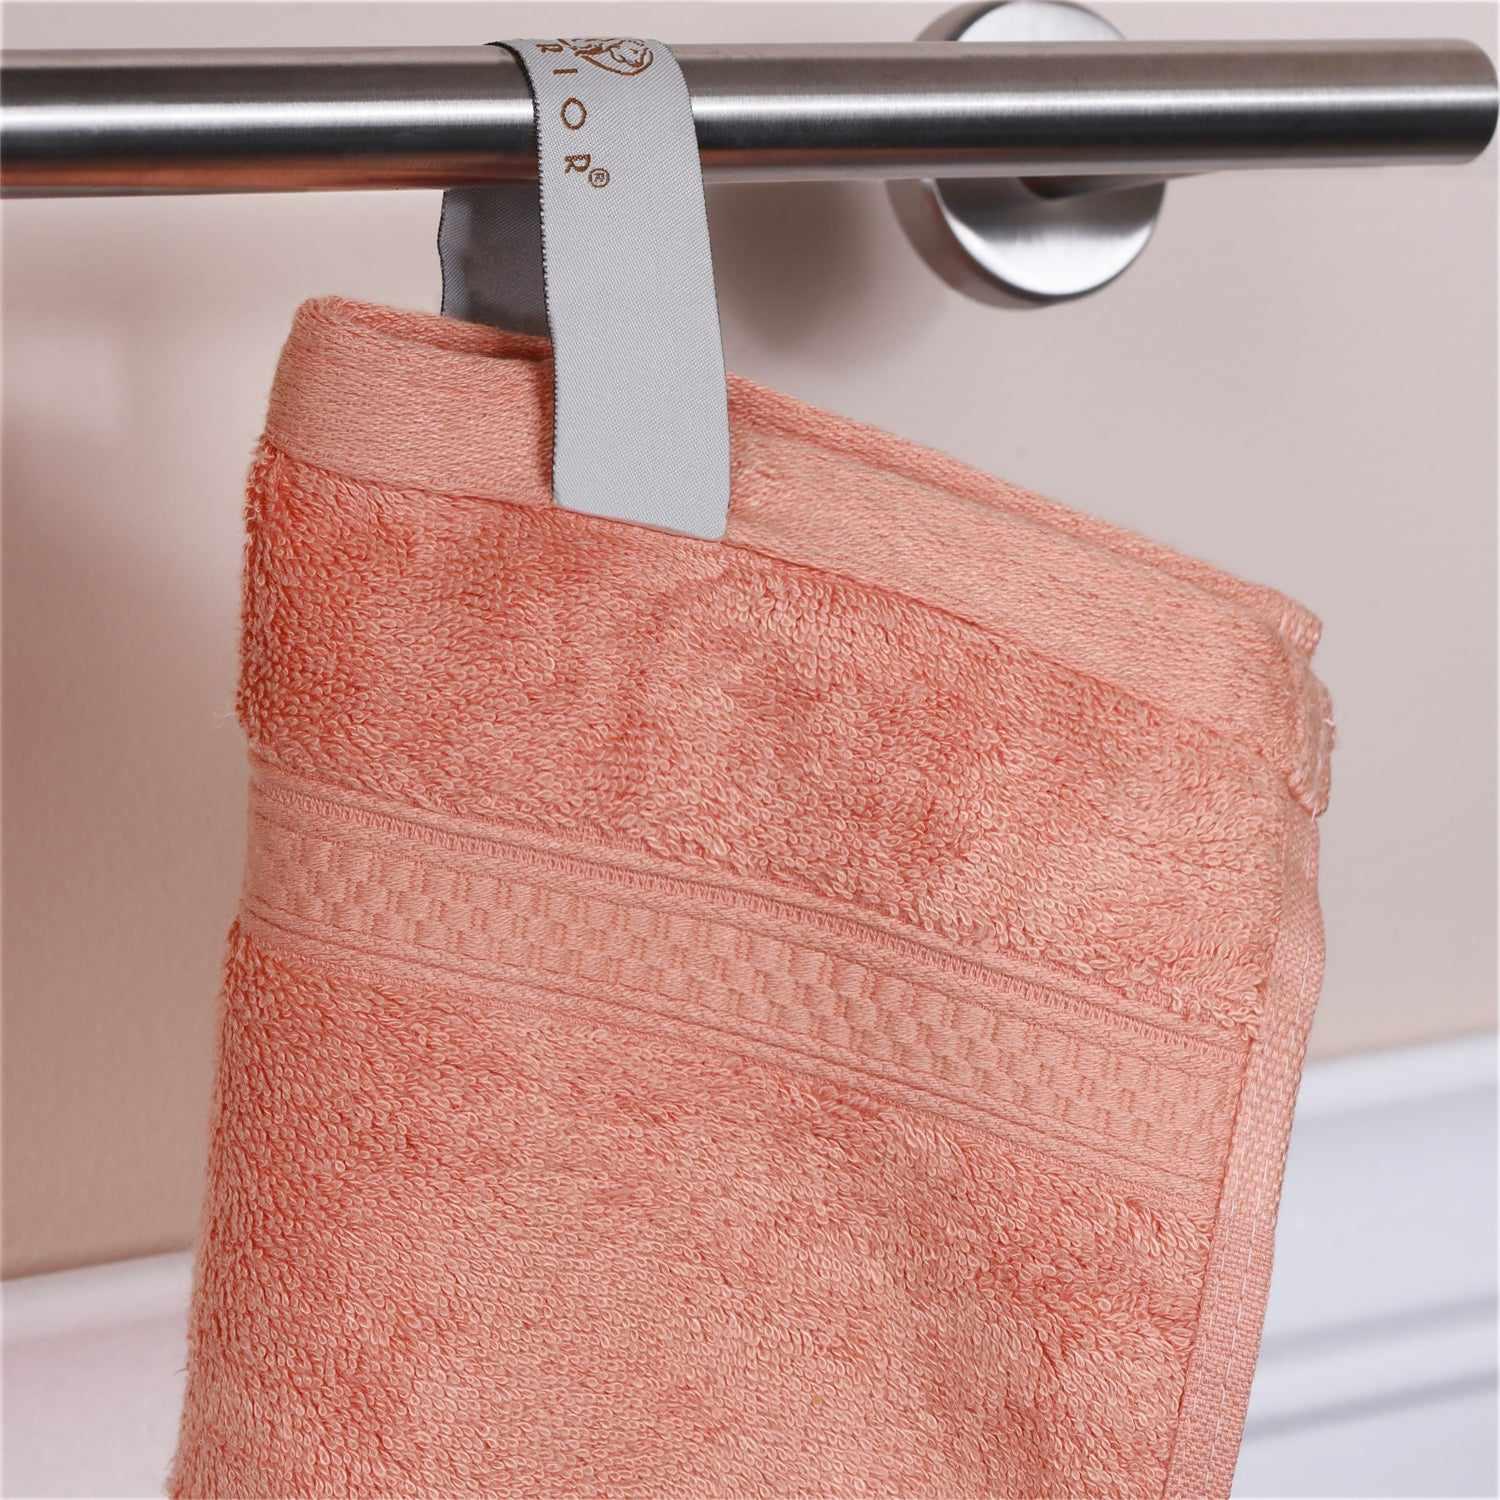 Superior Rayon from Bamboo/Cotton Face Towel - (Set of 12) - On Sale - Bed  Bath & Beyond - 10422422